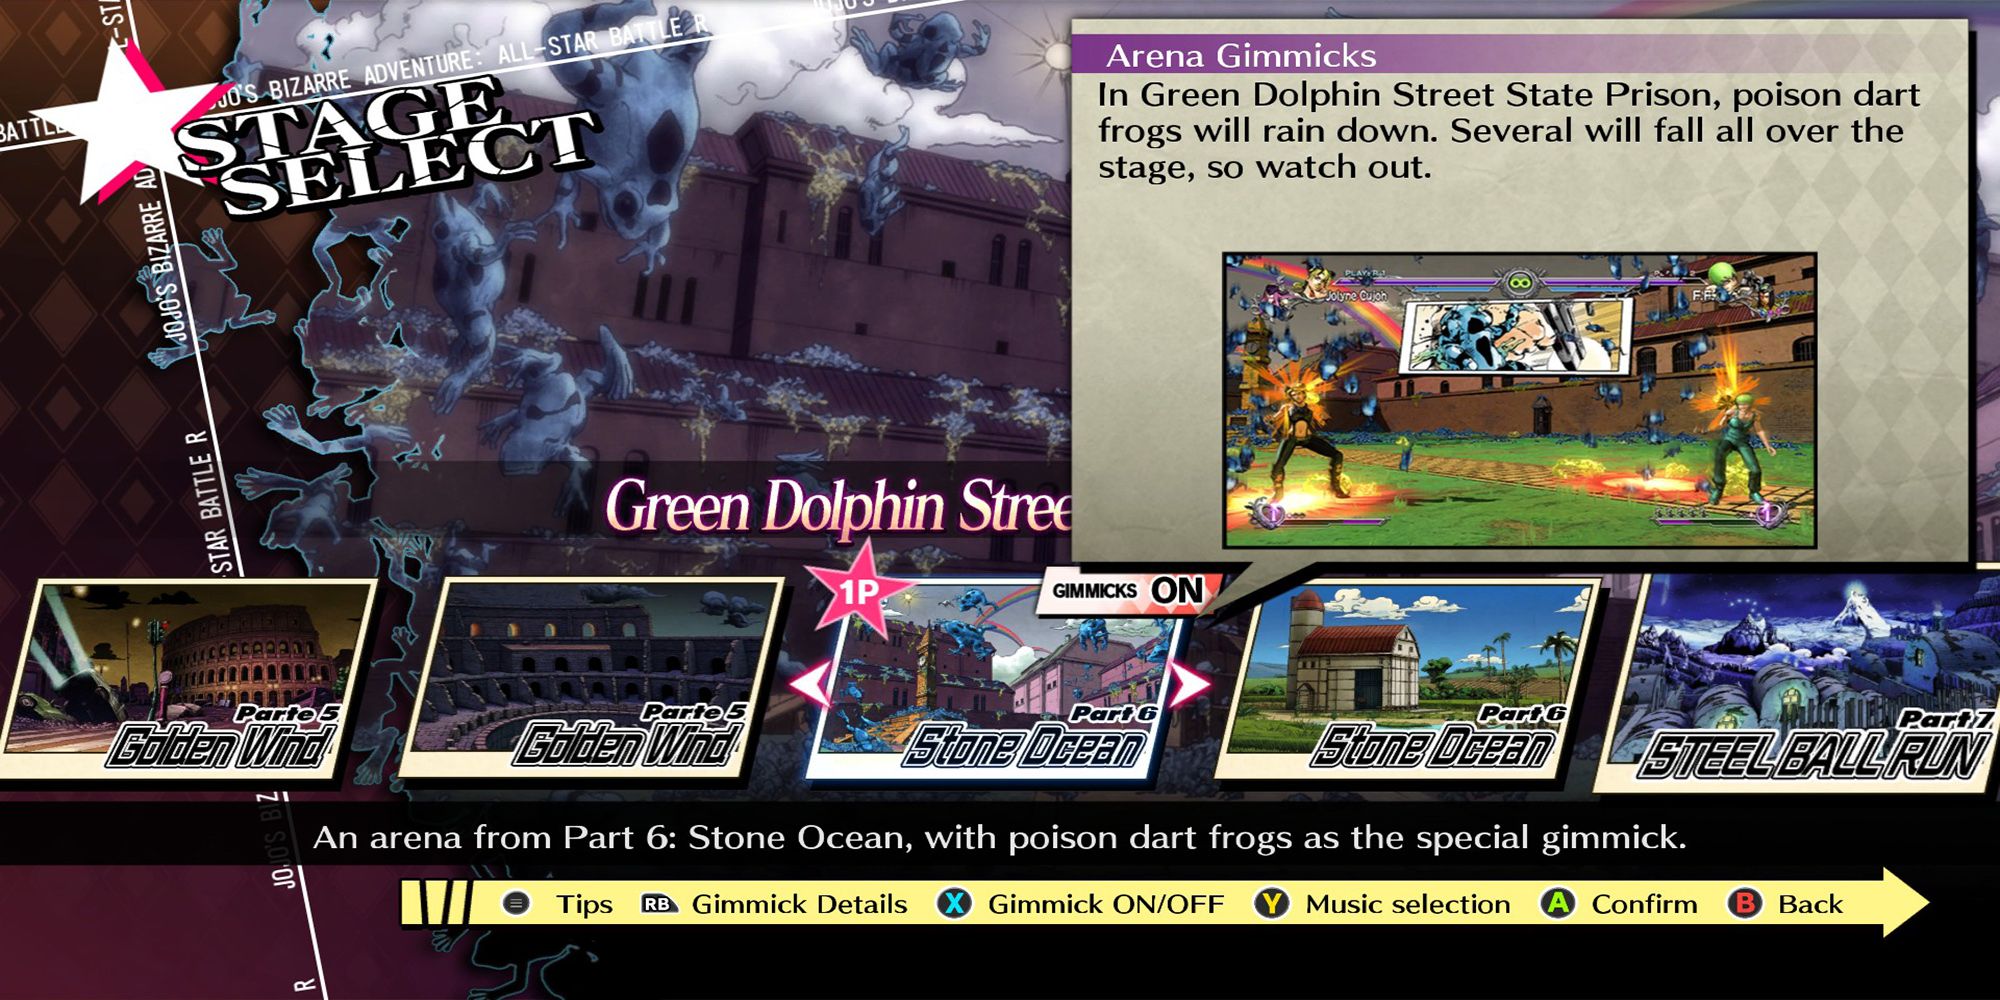 In JoJo's Bizarre Adventure: ASBR, Dolphin State Prison's arena gimmick is a storm of poisonous frogs falling from the sky.